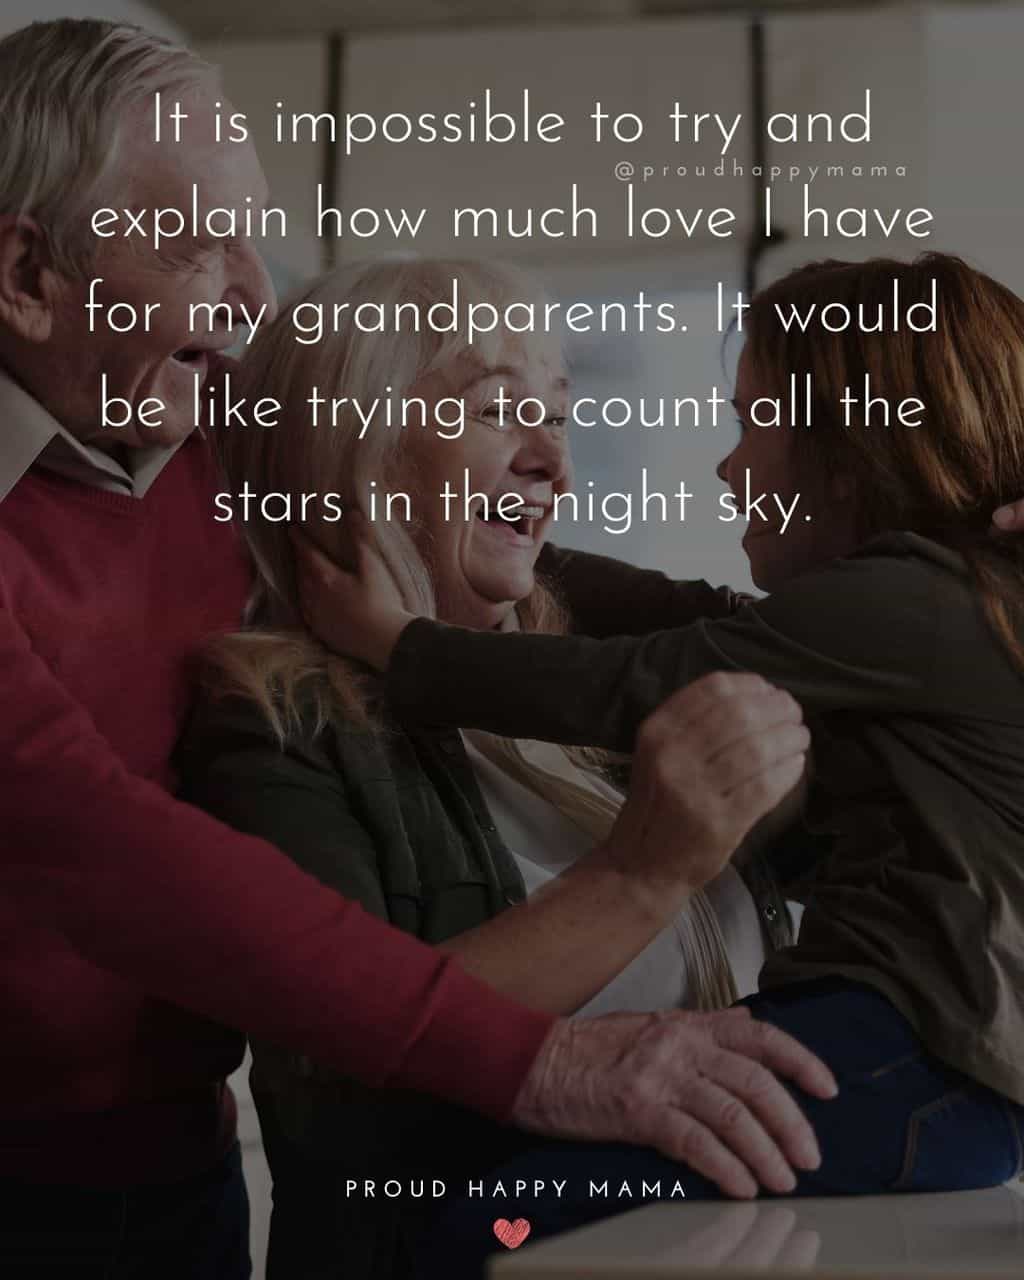 Grandparent Quotes – It is impossible to try and explain how much love I have for my grandparents. It would be like trying to